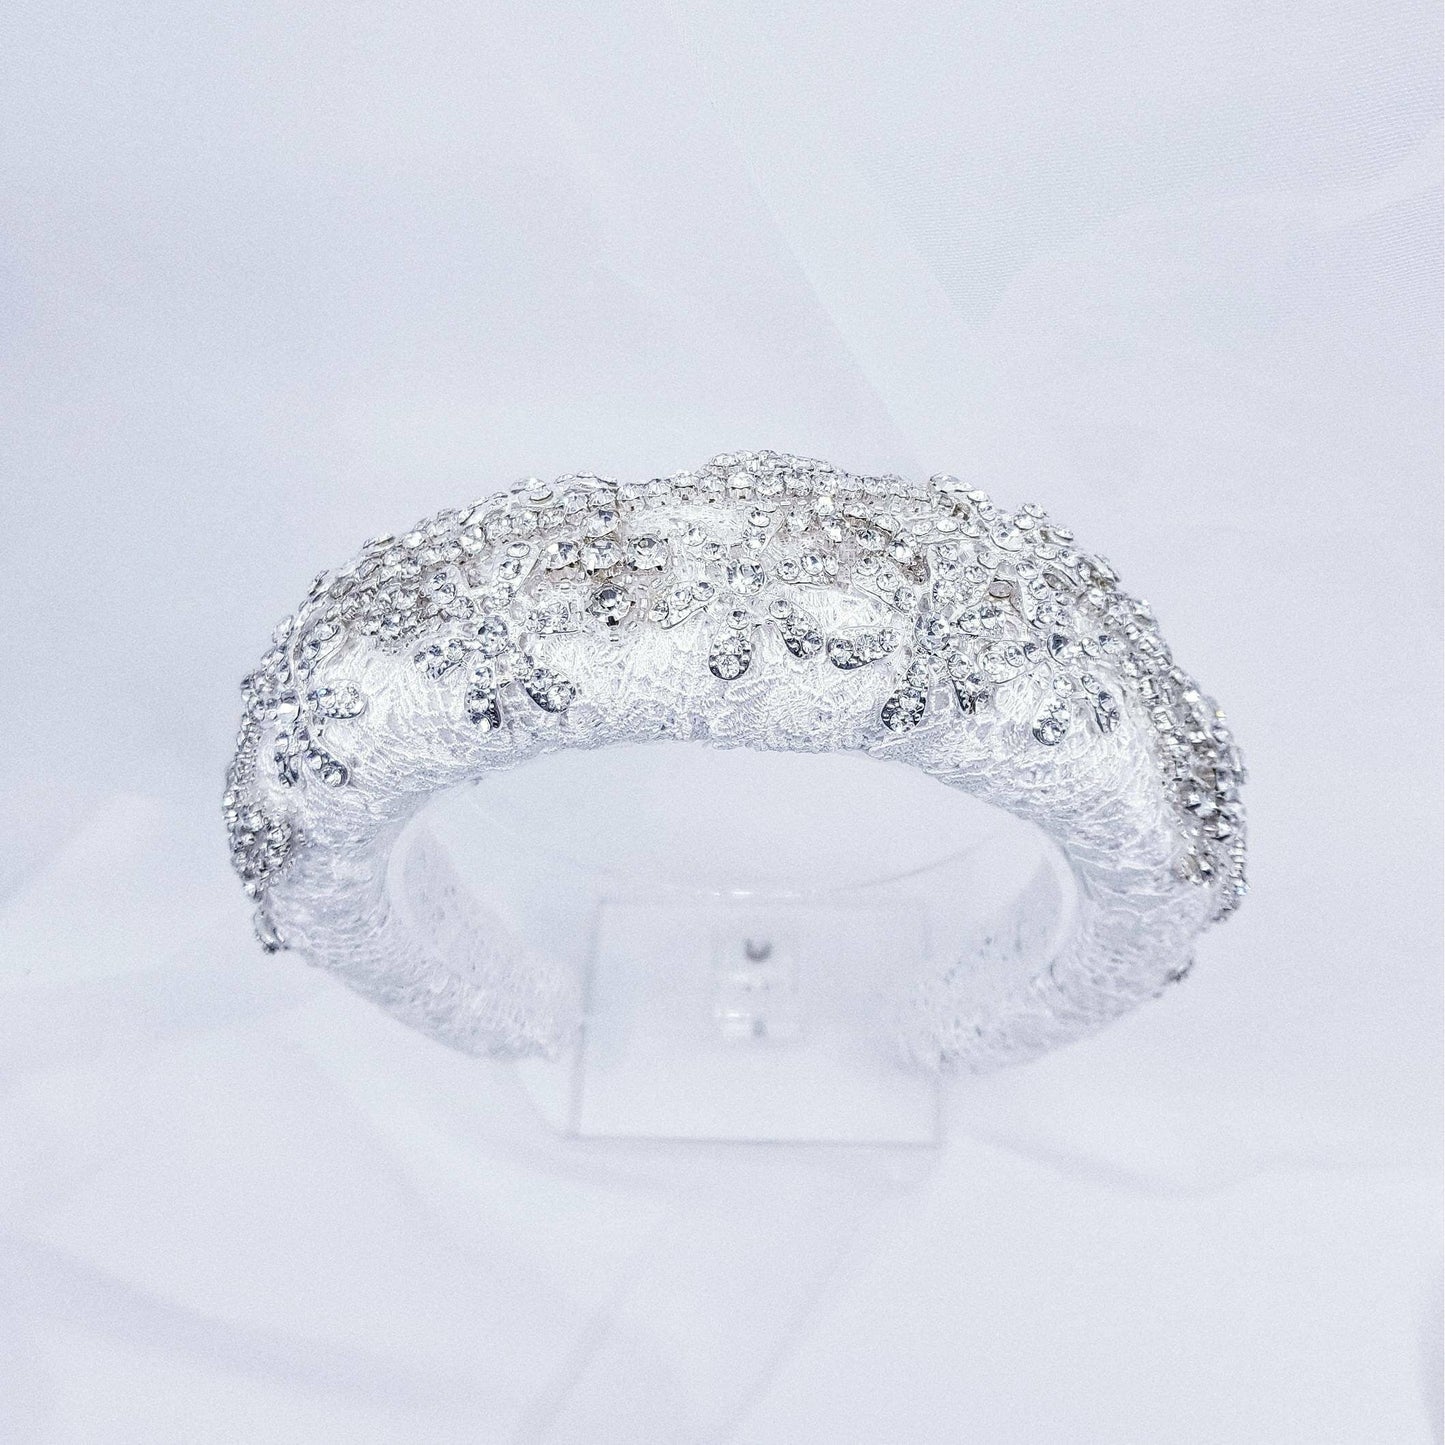 LA ROSE Padded Lace Headband White flower floral lace headpieces millinery Australia wedding bridal bling crystal hair jewel accessory puffy